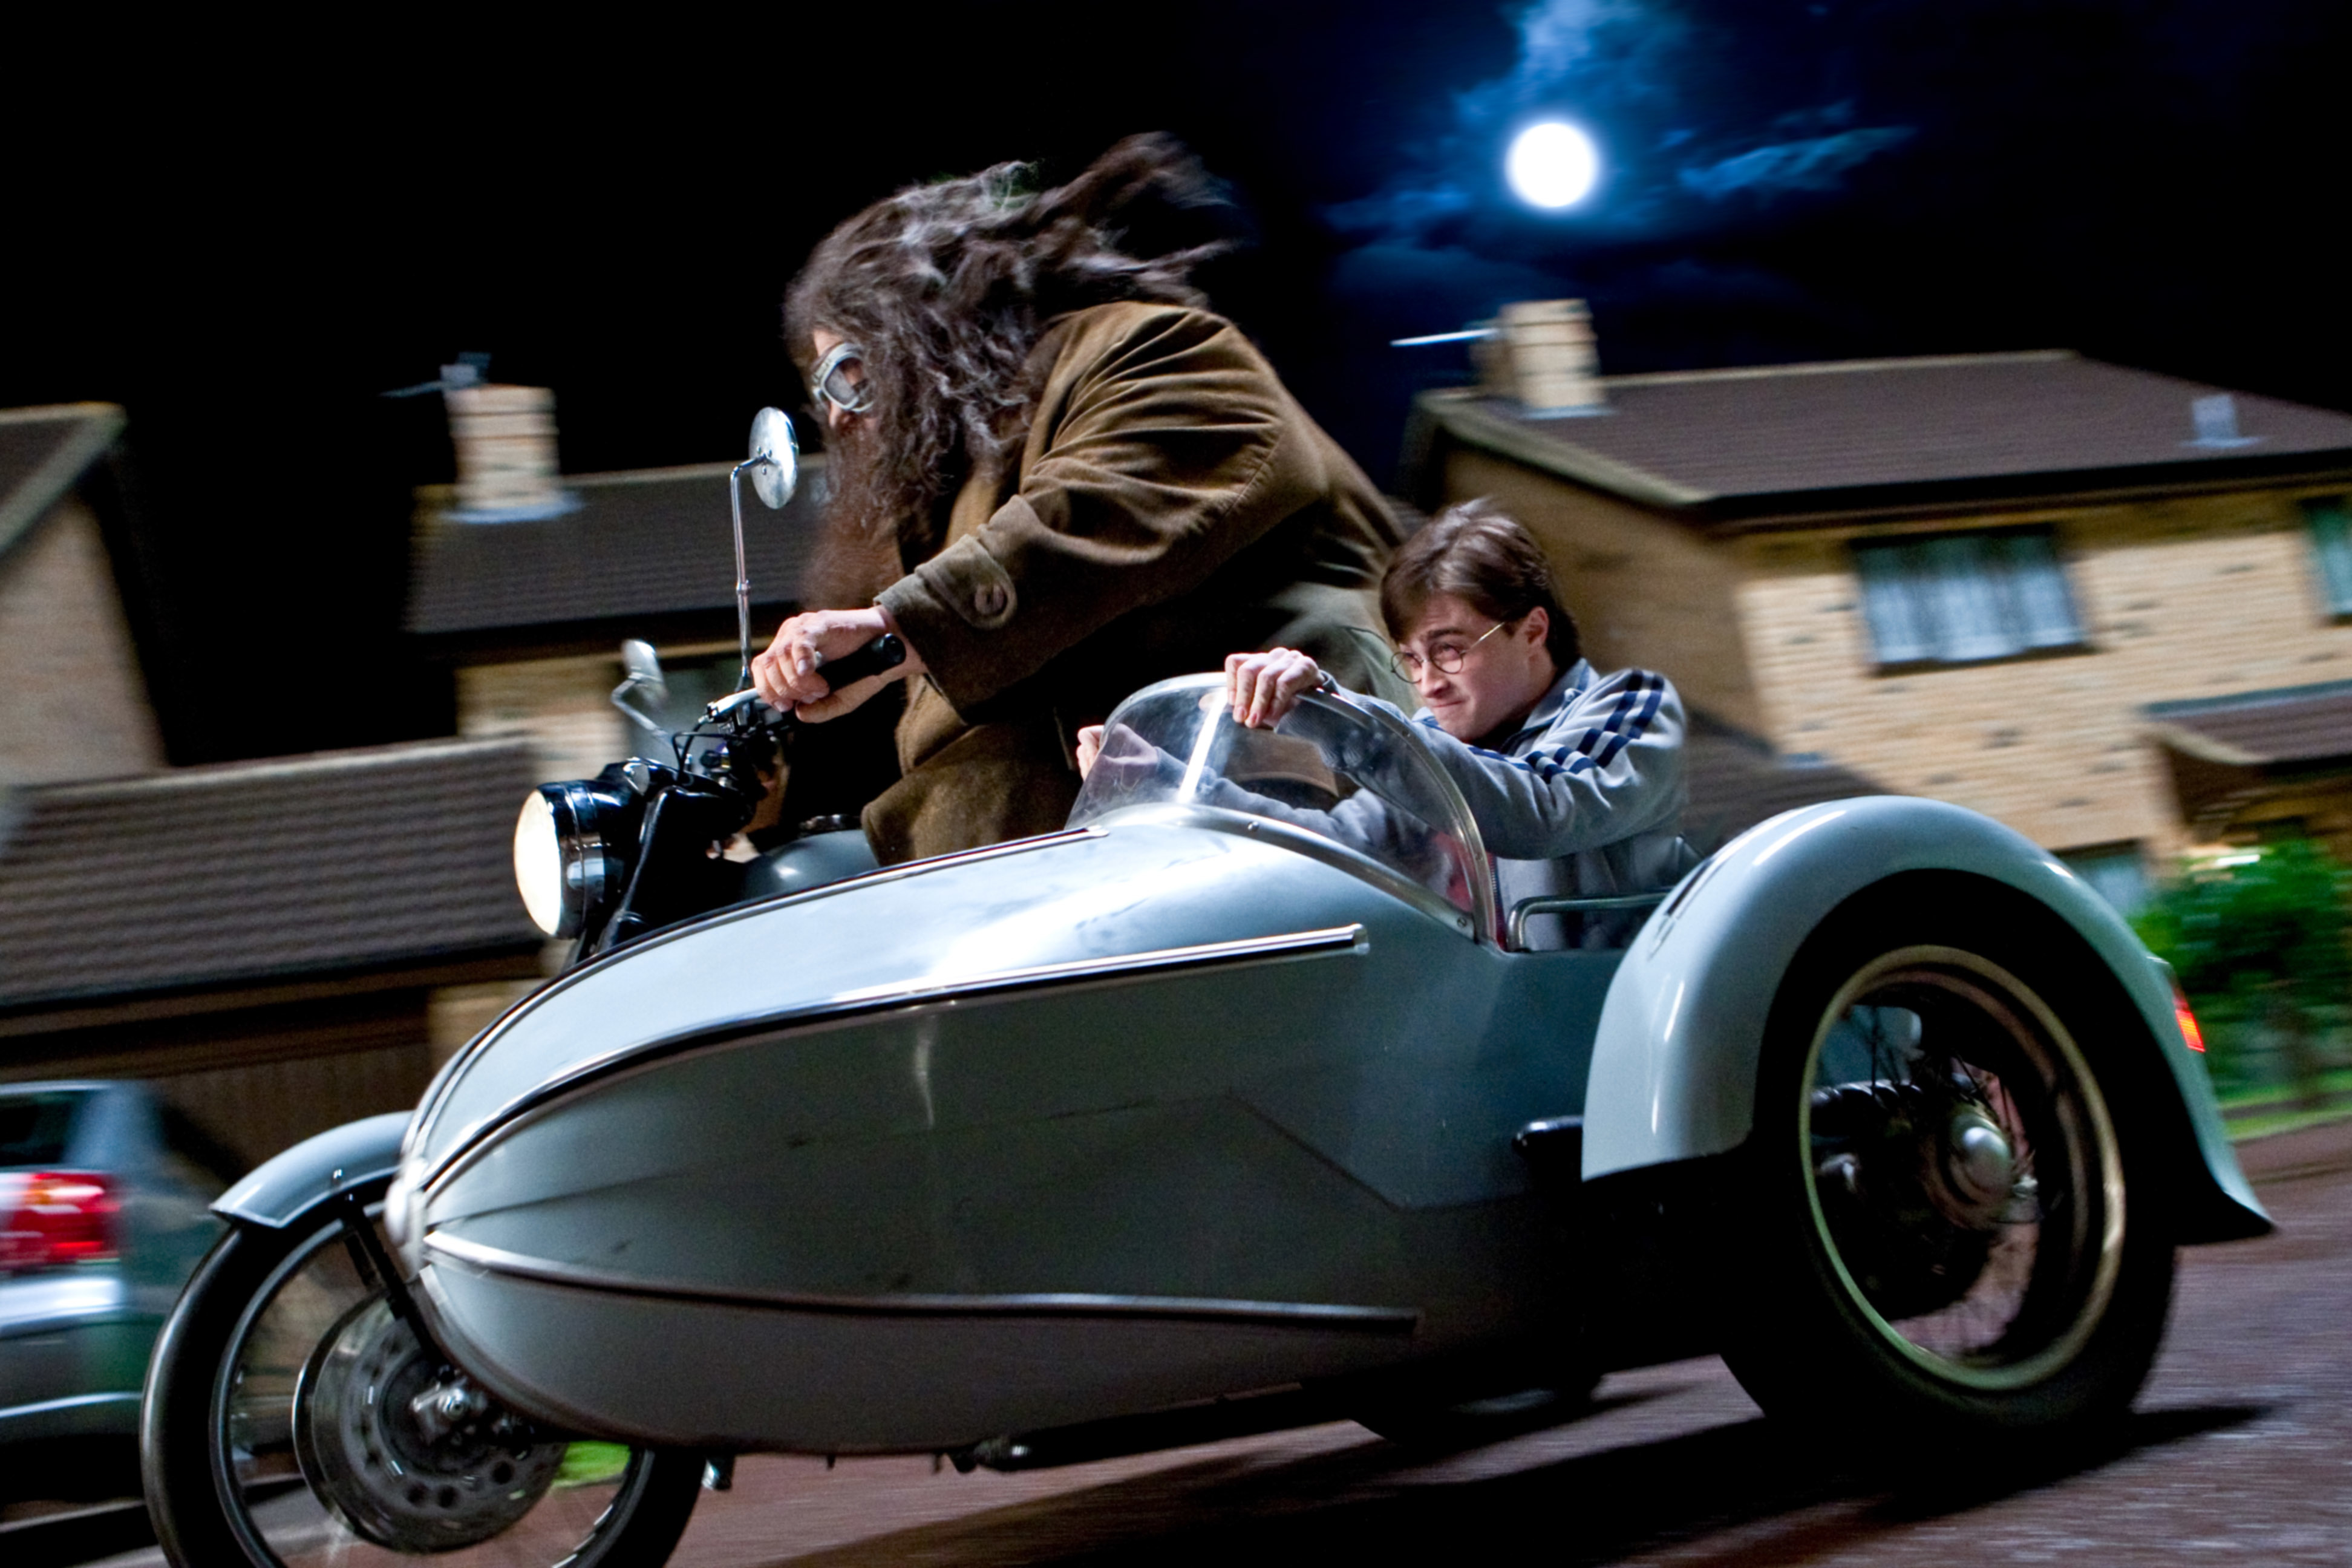 Hagrid and Harry Potter riding a motorcycle with a sidecar at night